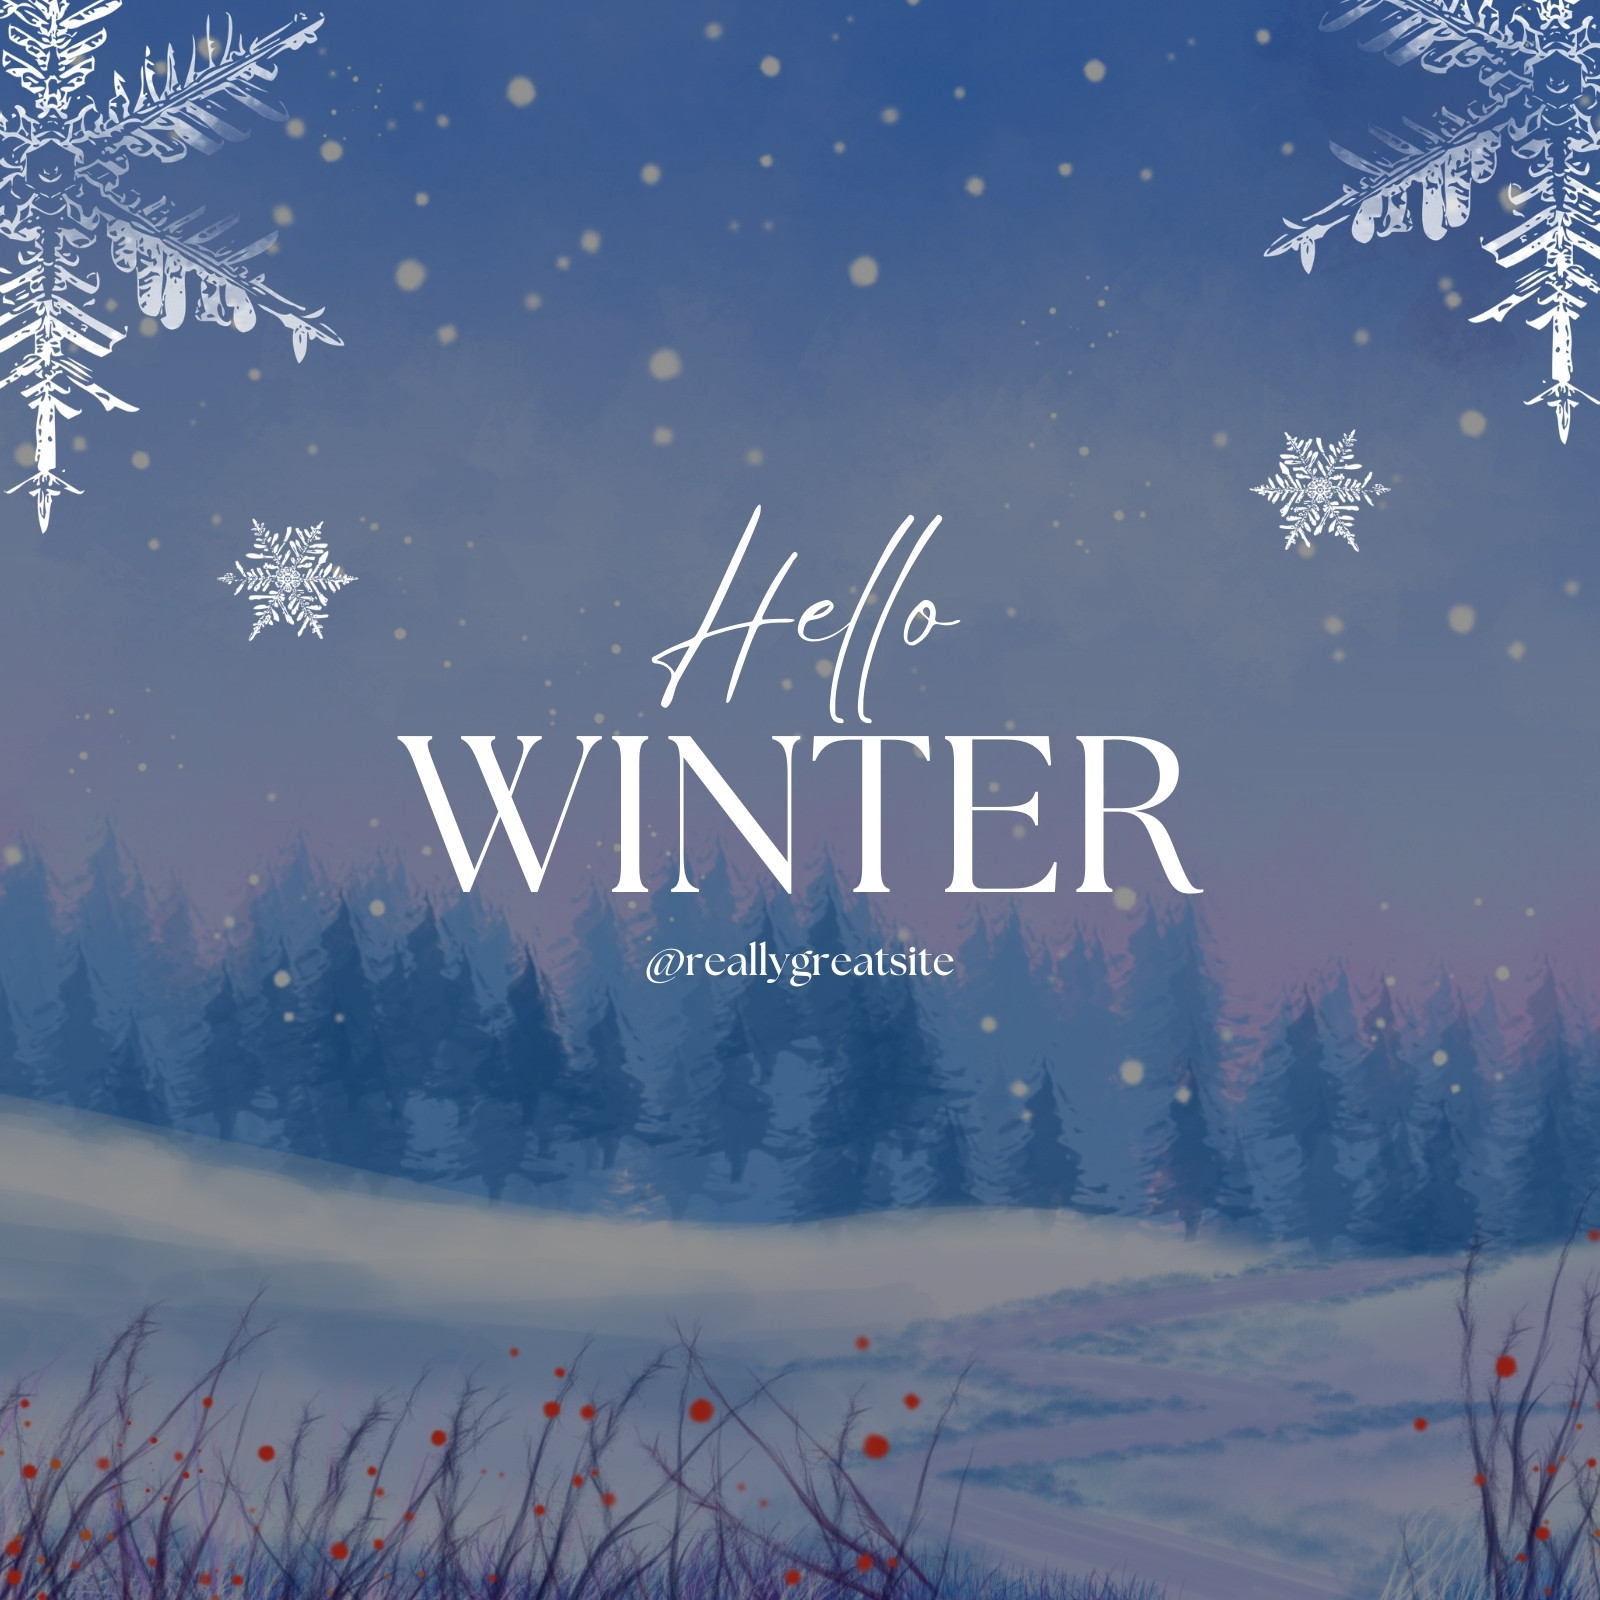 A4 Beautiful Night Scene Poster Size A4 Winter Stars Snow Poster